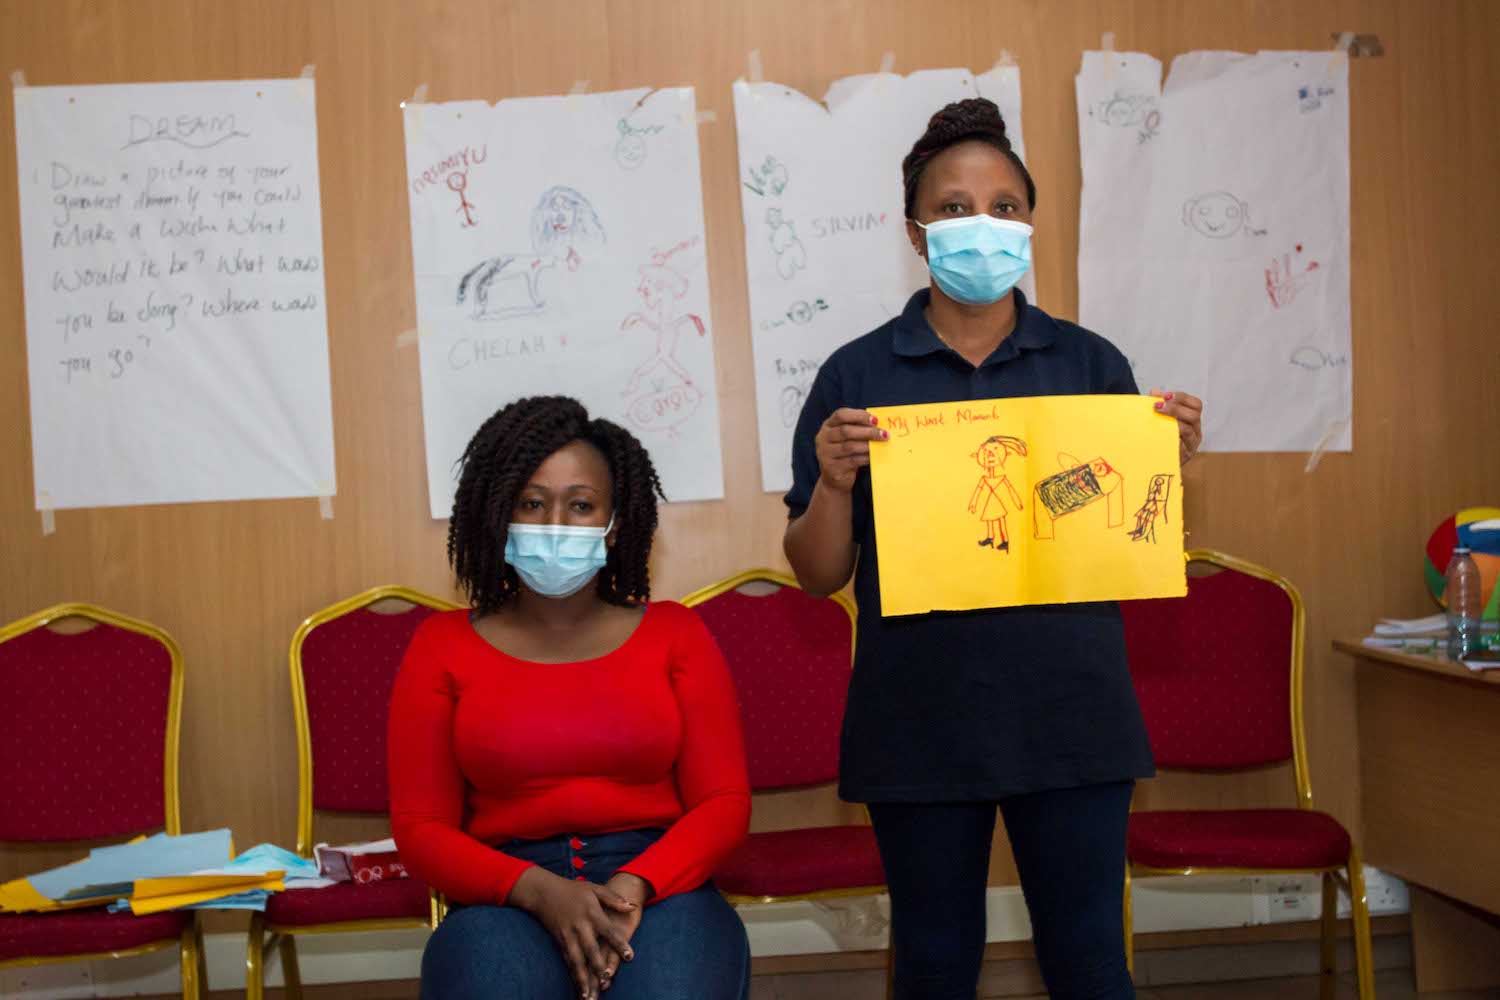 One woman wearing a red shirt and blue face mask is sitting, while another woman wearing a black shirt and blue face mask stands holding a yellow paper with drawings on it.